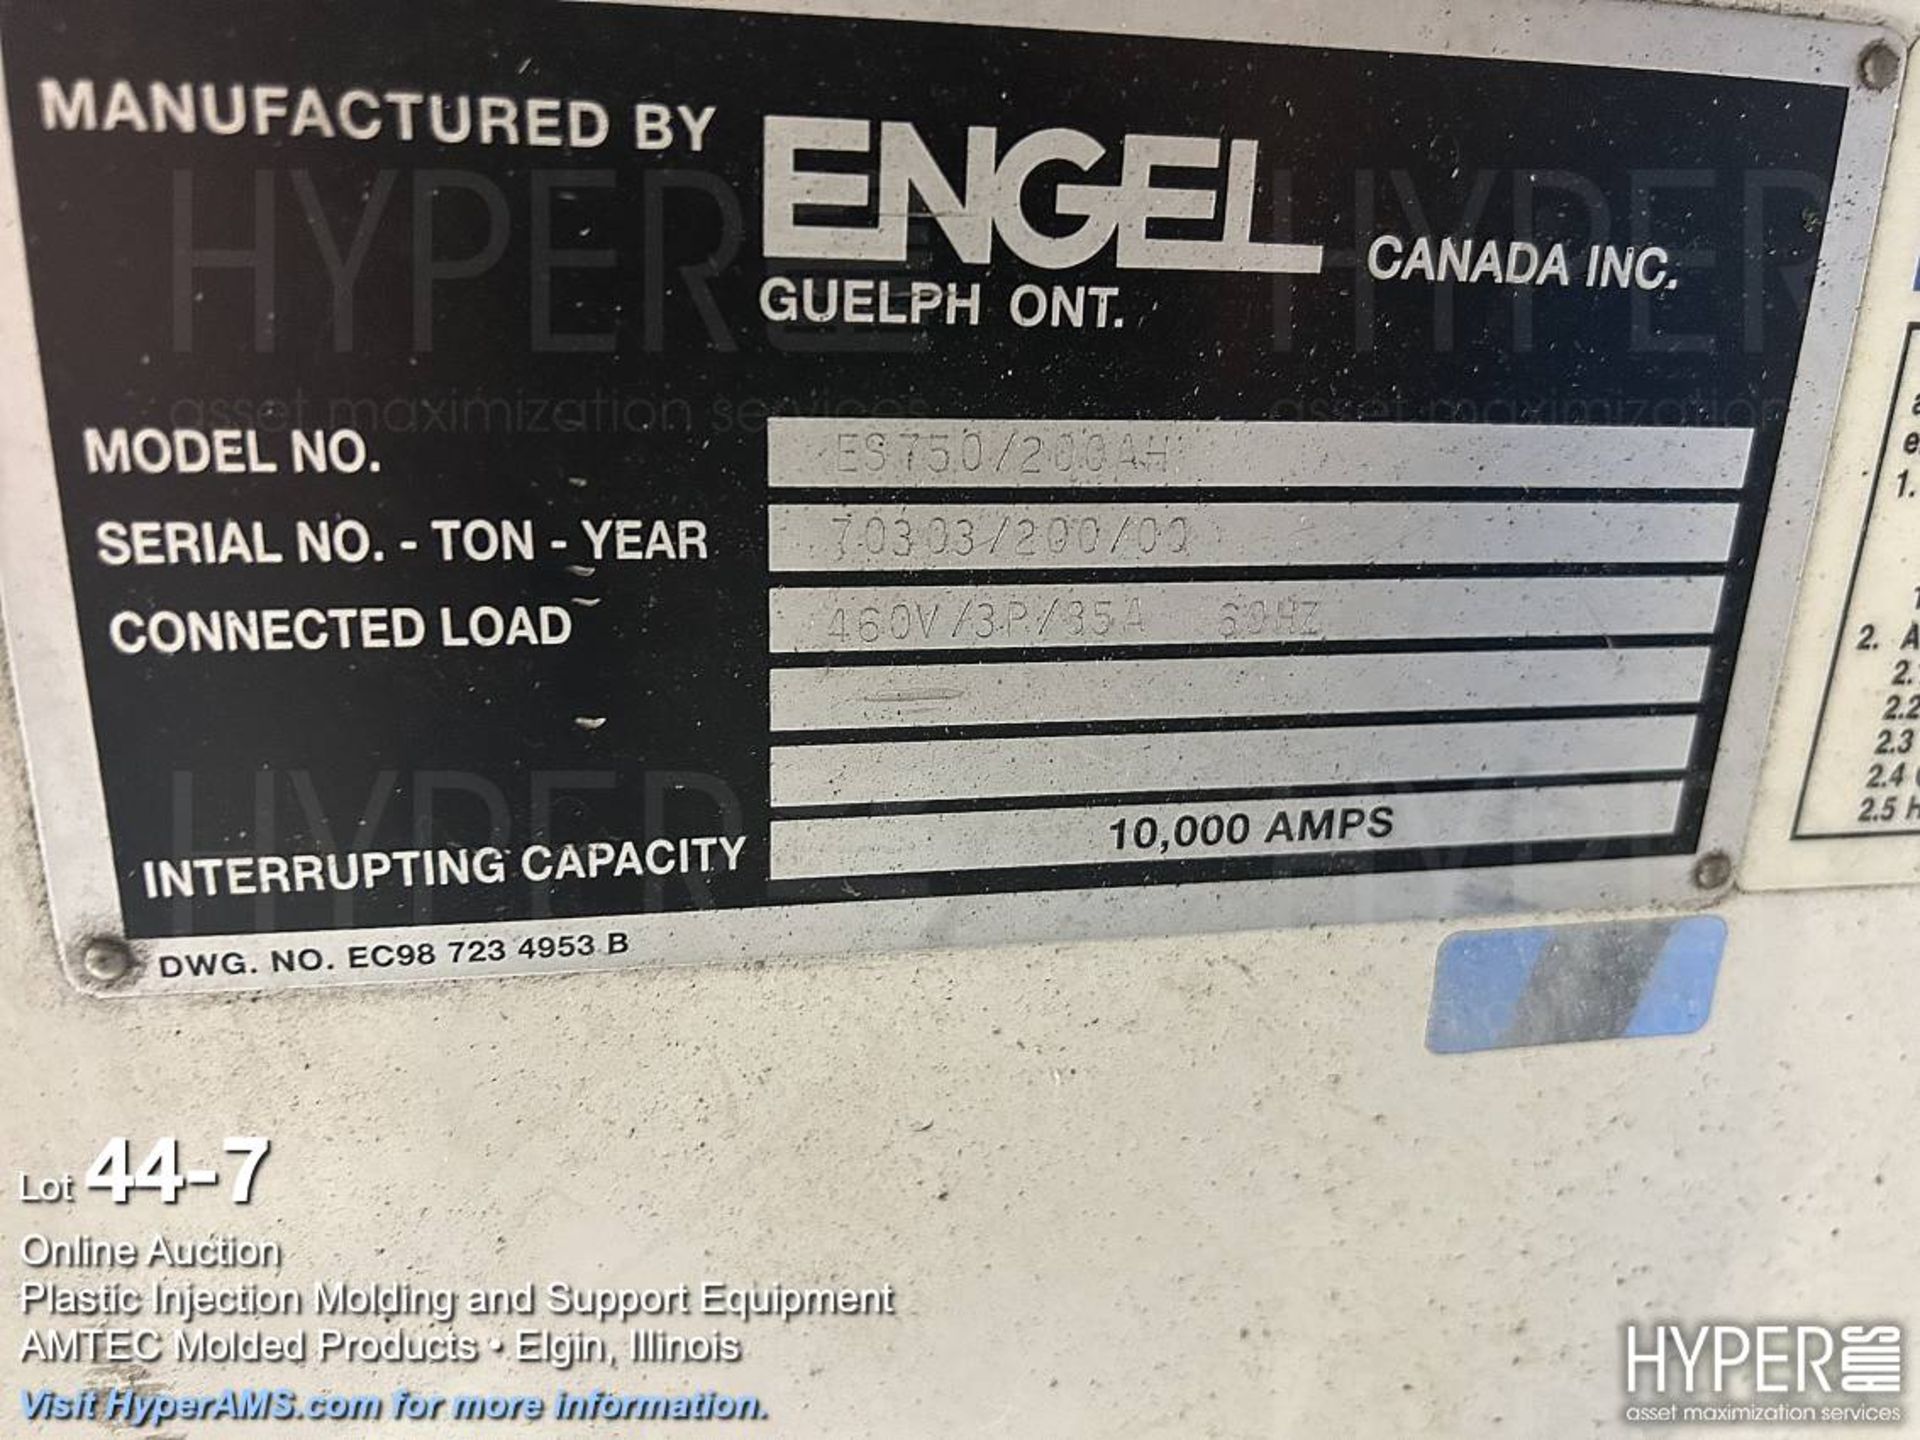 Engel ES750/200AH toggle clamp plastic injection molding machine - Image 7 of 16